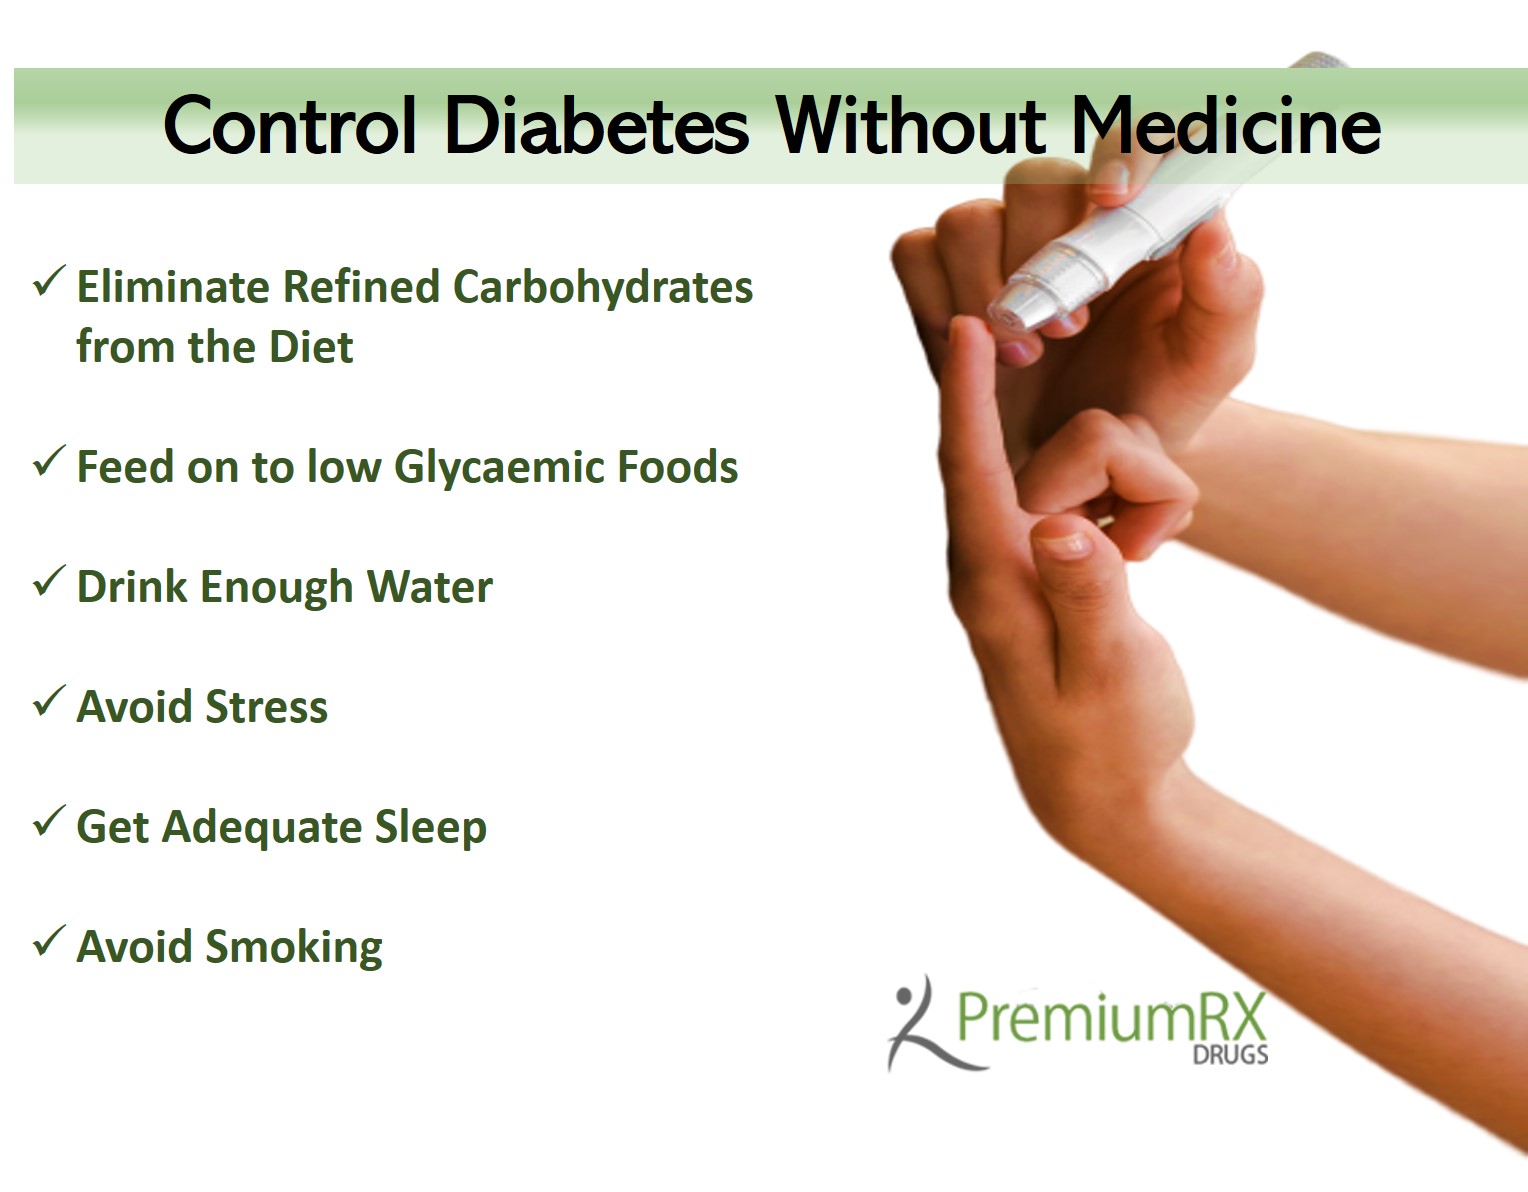 How To Control Diabetes Without Medicine